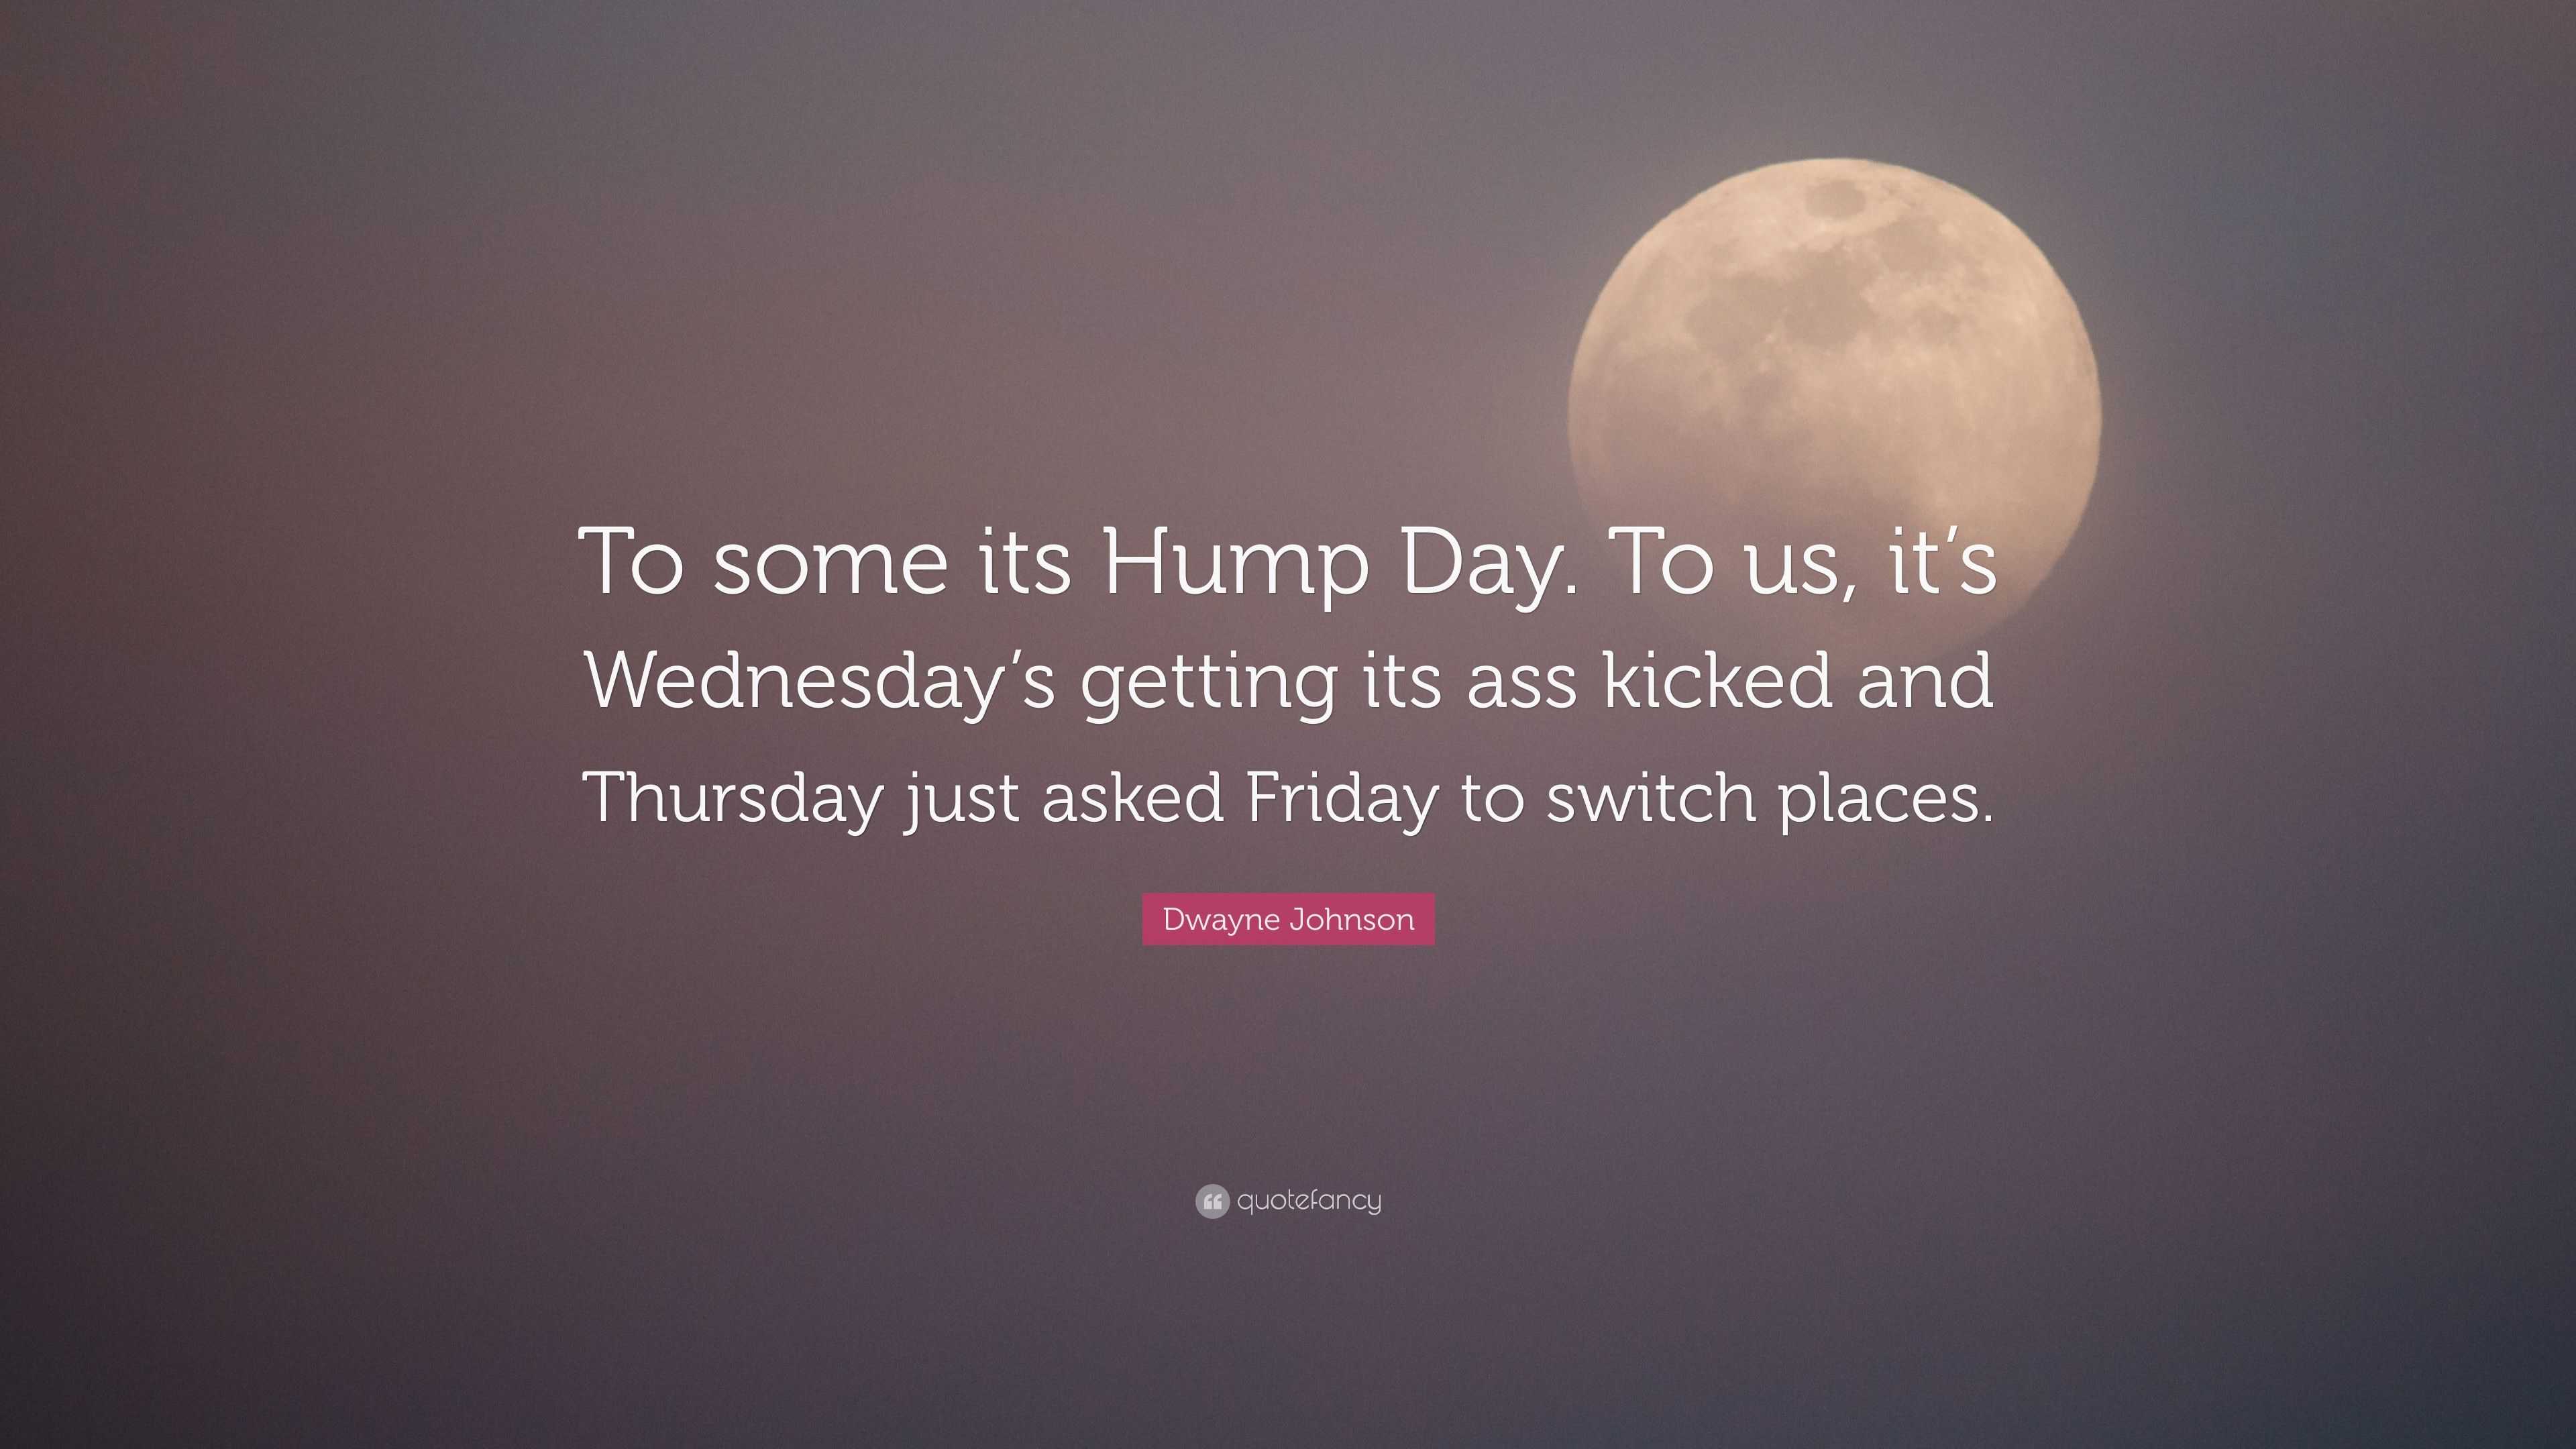 Hump day booty content ✓ #HumpDay #BootyWork #HardWorkPaysOff